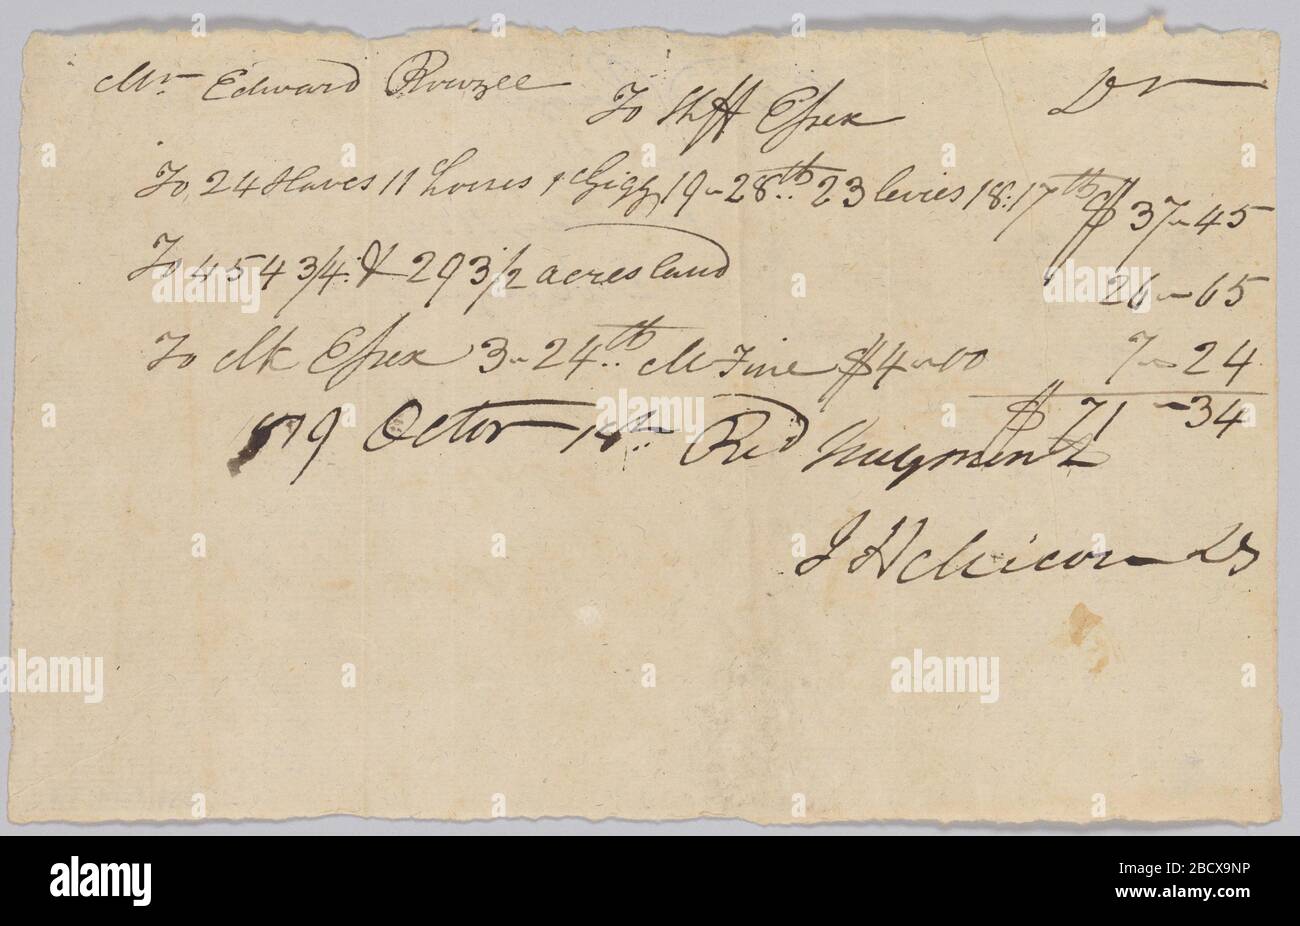 Account of taxable property including enslaved persons owned by Edward Rouzee. This document is from a collection of financial papers related to the plantation operations of several generations of the Rouzee Family in Essex County, Virginia. Account of taxable property including enslaved persons owned by Edward Rouzee Stock Photo